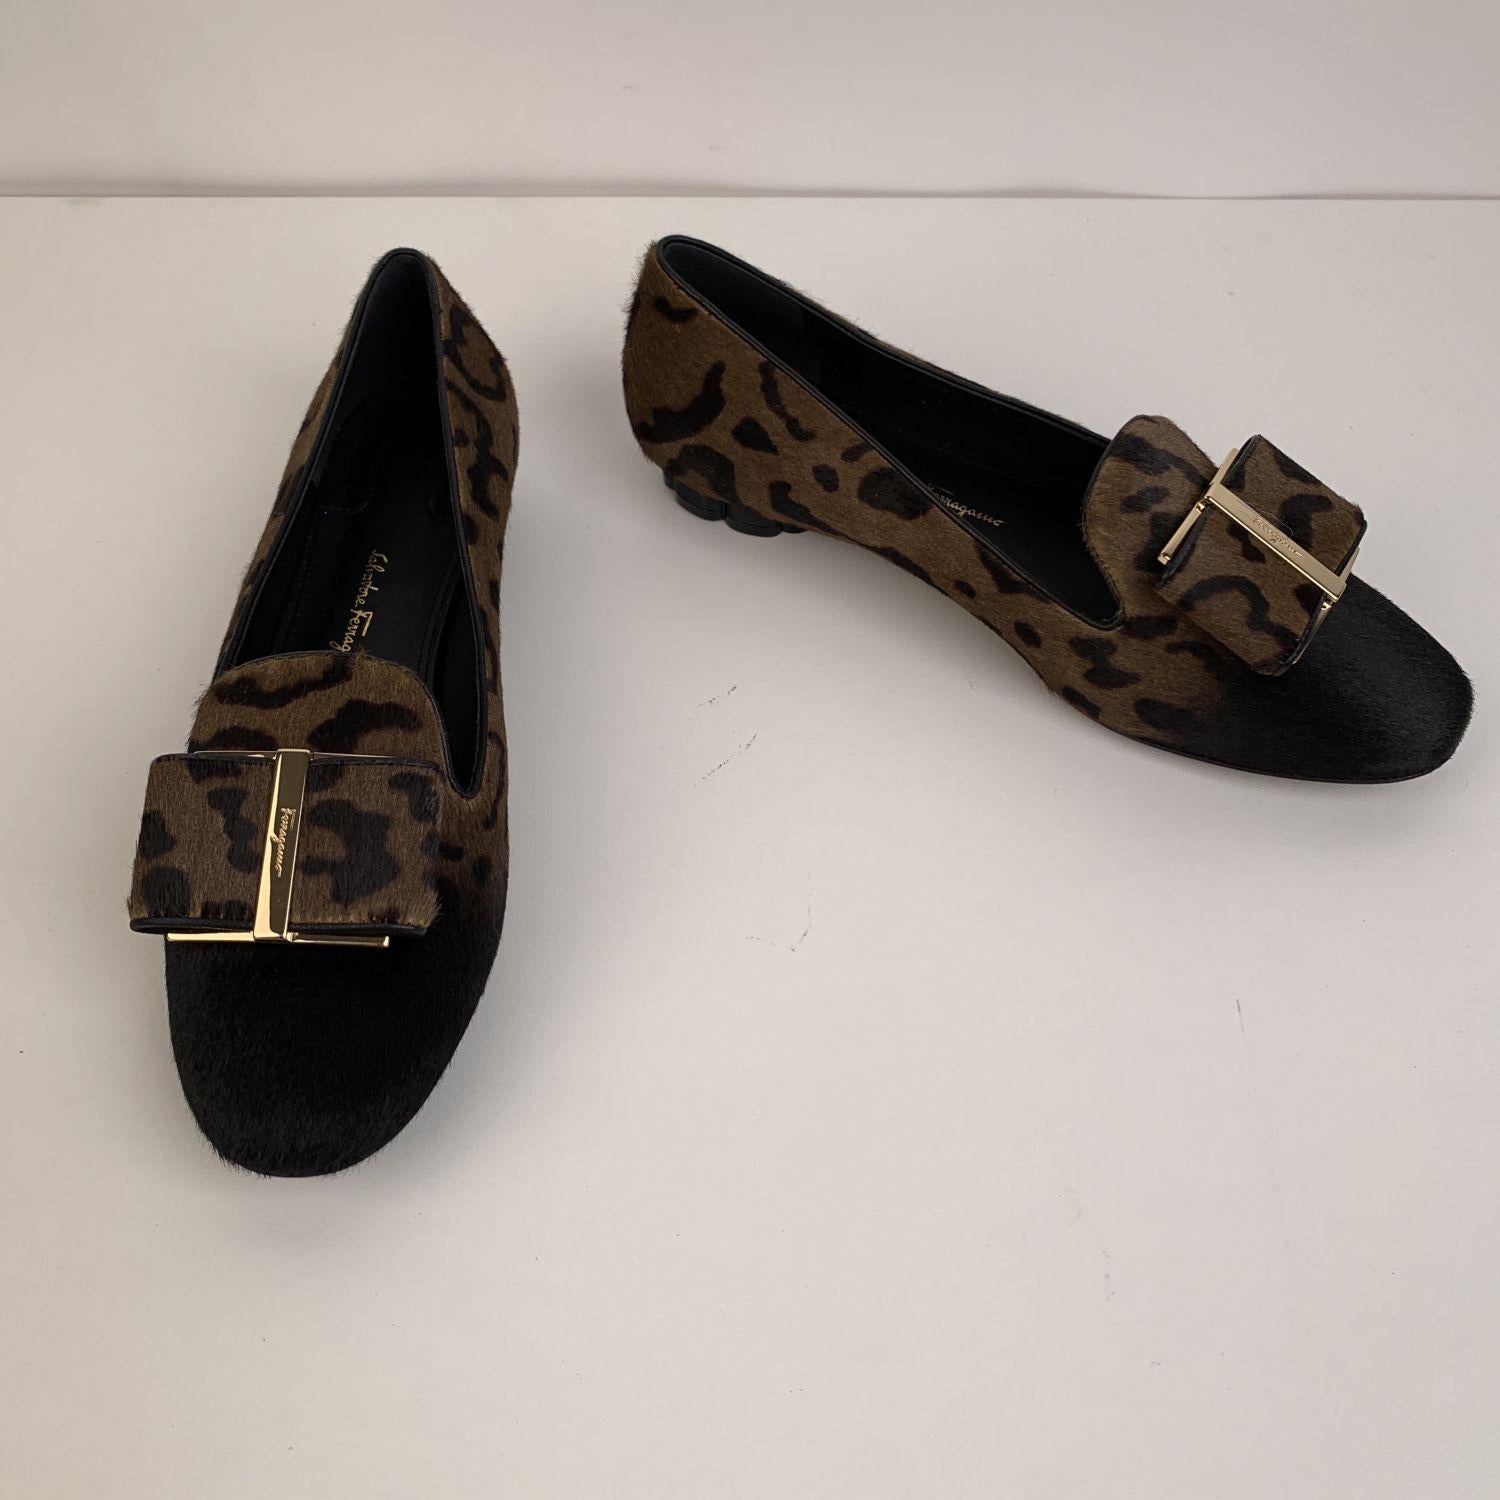 Beautiful Salvatore Ferragamo Leopard ballet flat. Crafted in leopard pony hair upper, they feature a rounded toe, slip-one design, Vara-bow detailing with gold metal accents on the toes and block flower-shaped heel (height: 1cm). Leather sole. Made